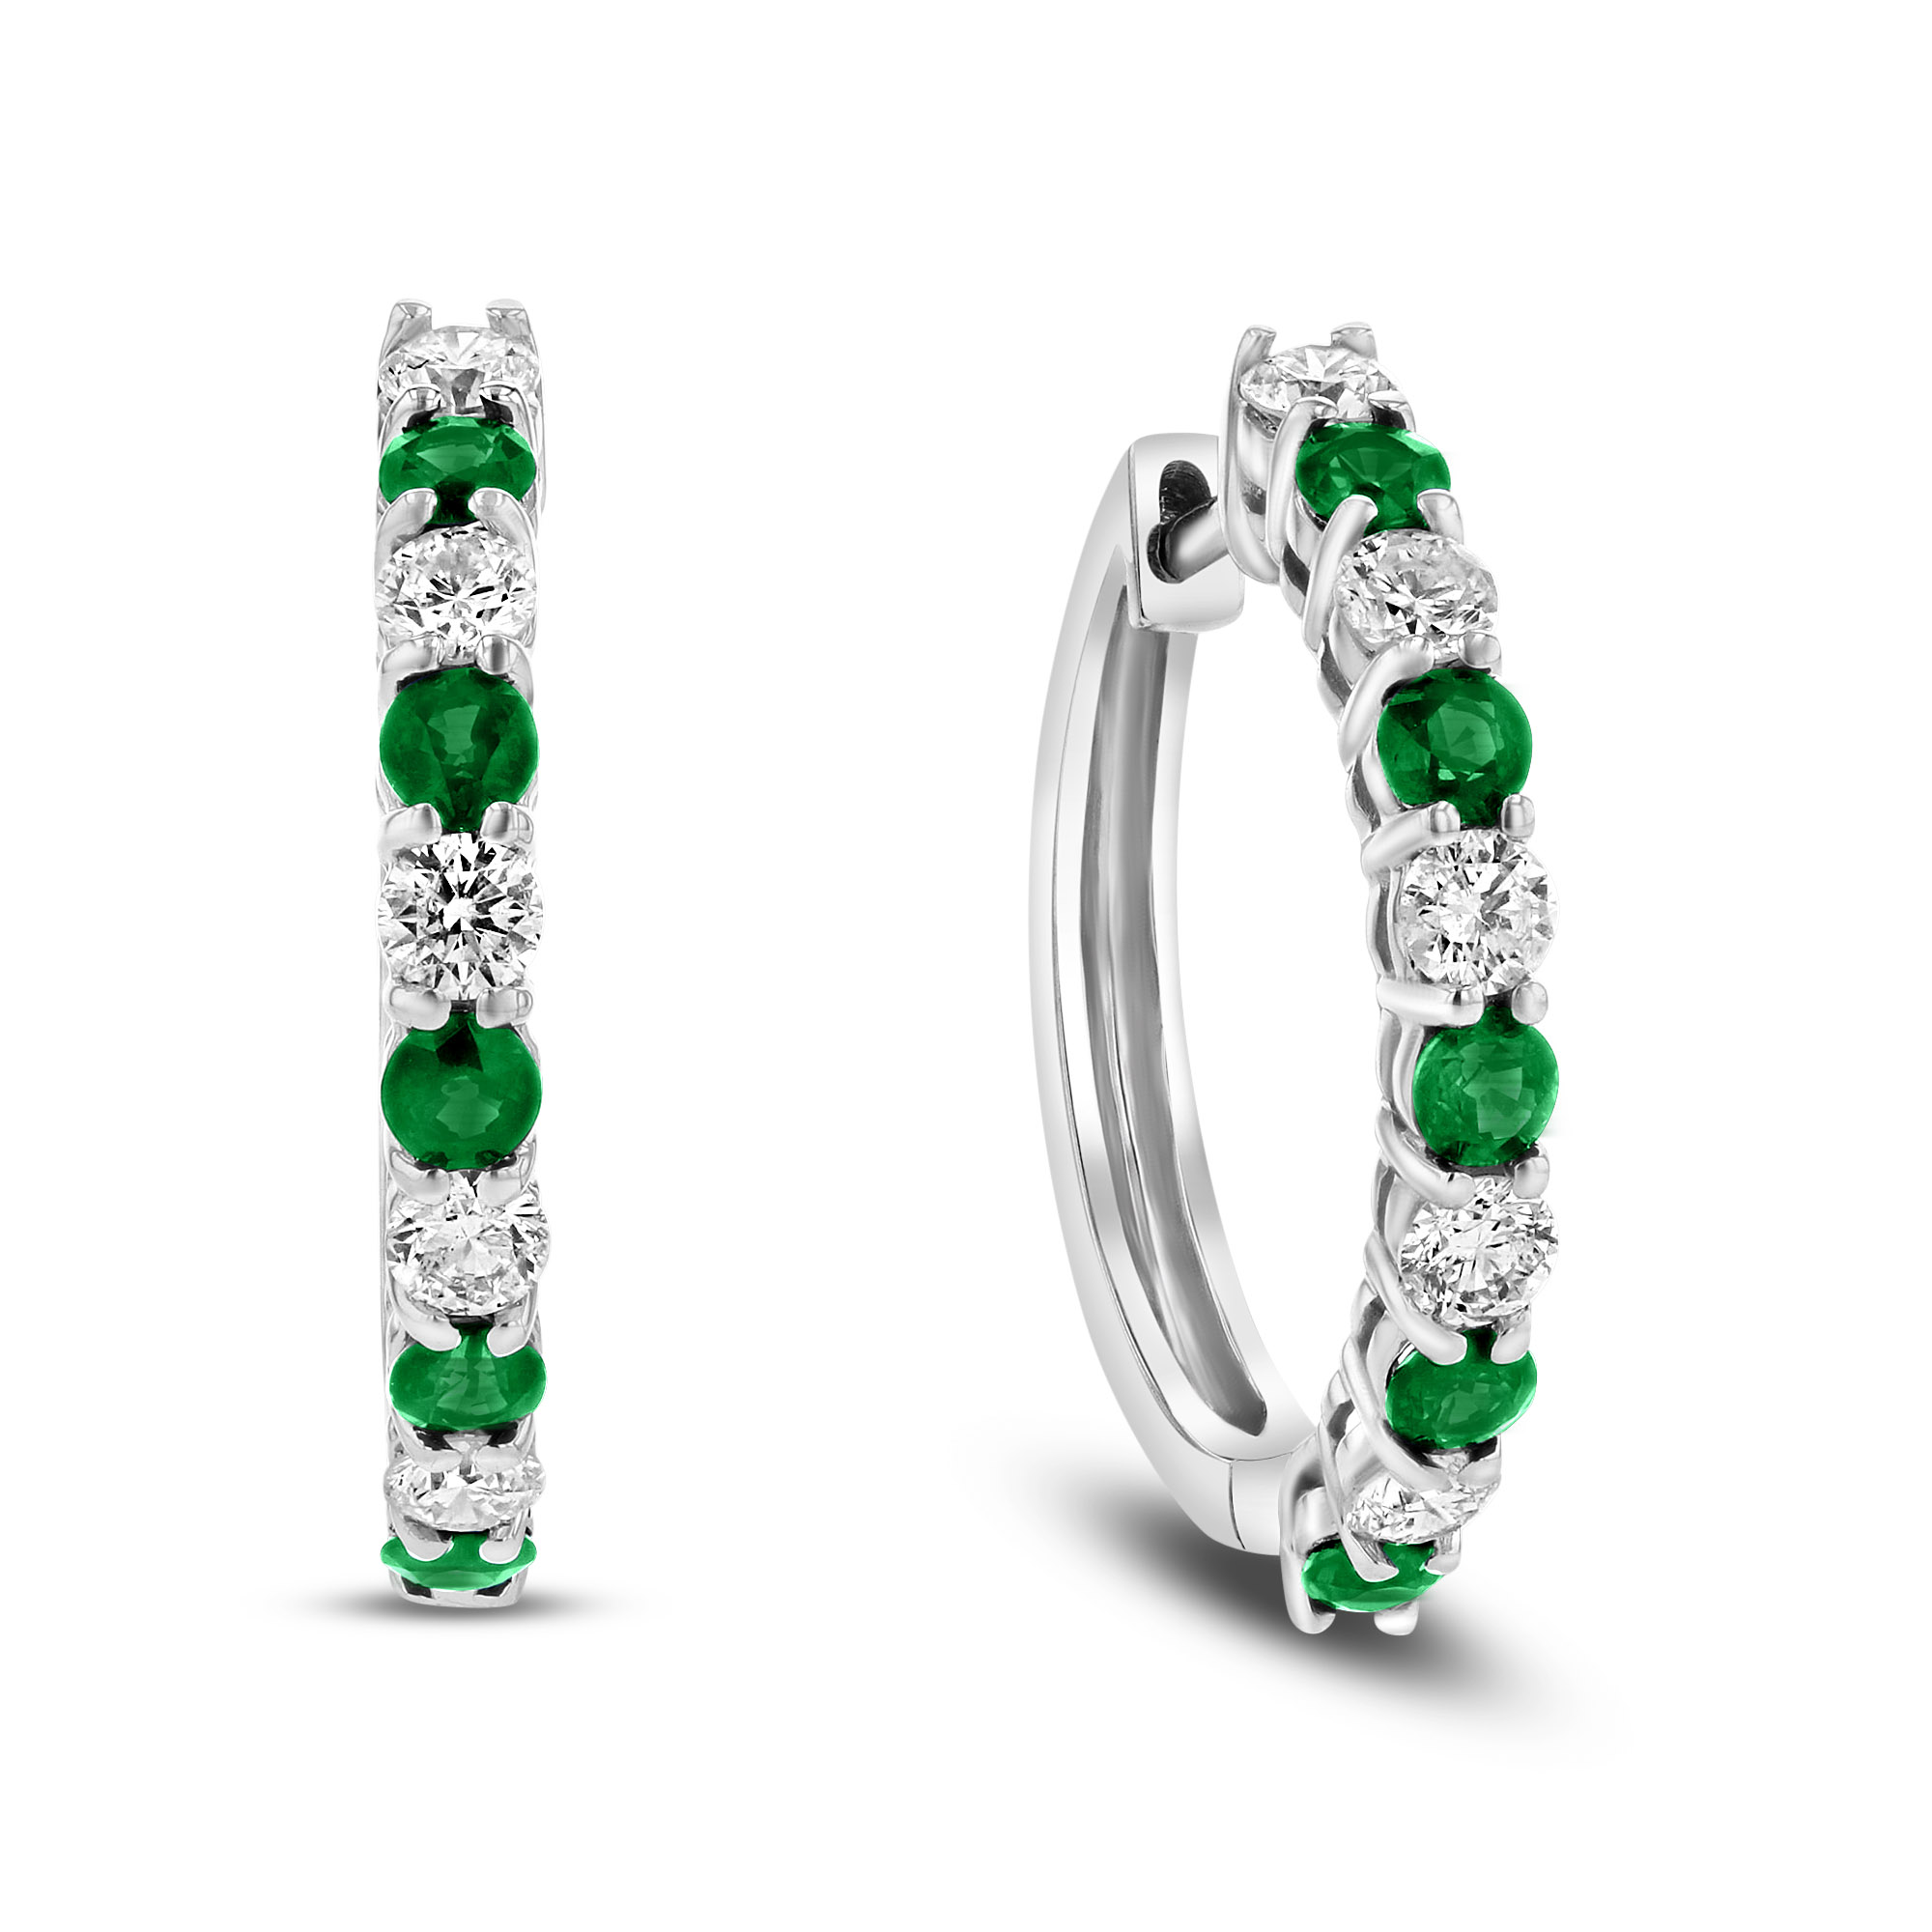 View 1.35ctw Diamond and Emerald Hoop Earrings in 14k White Gold